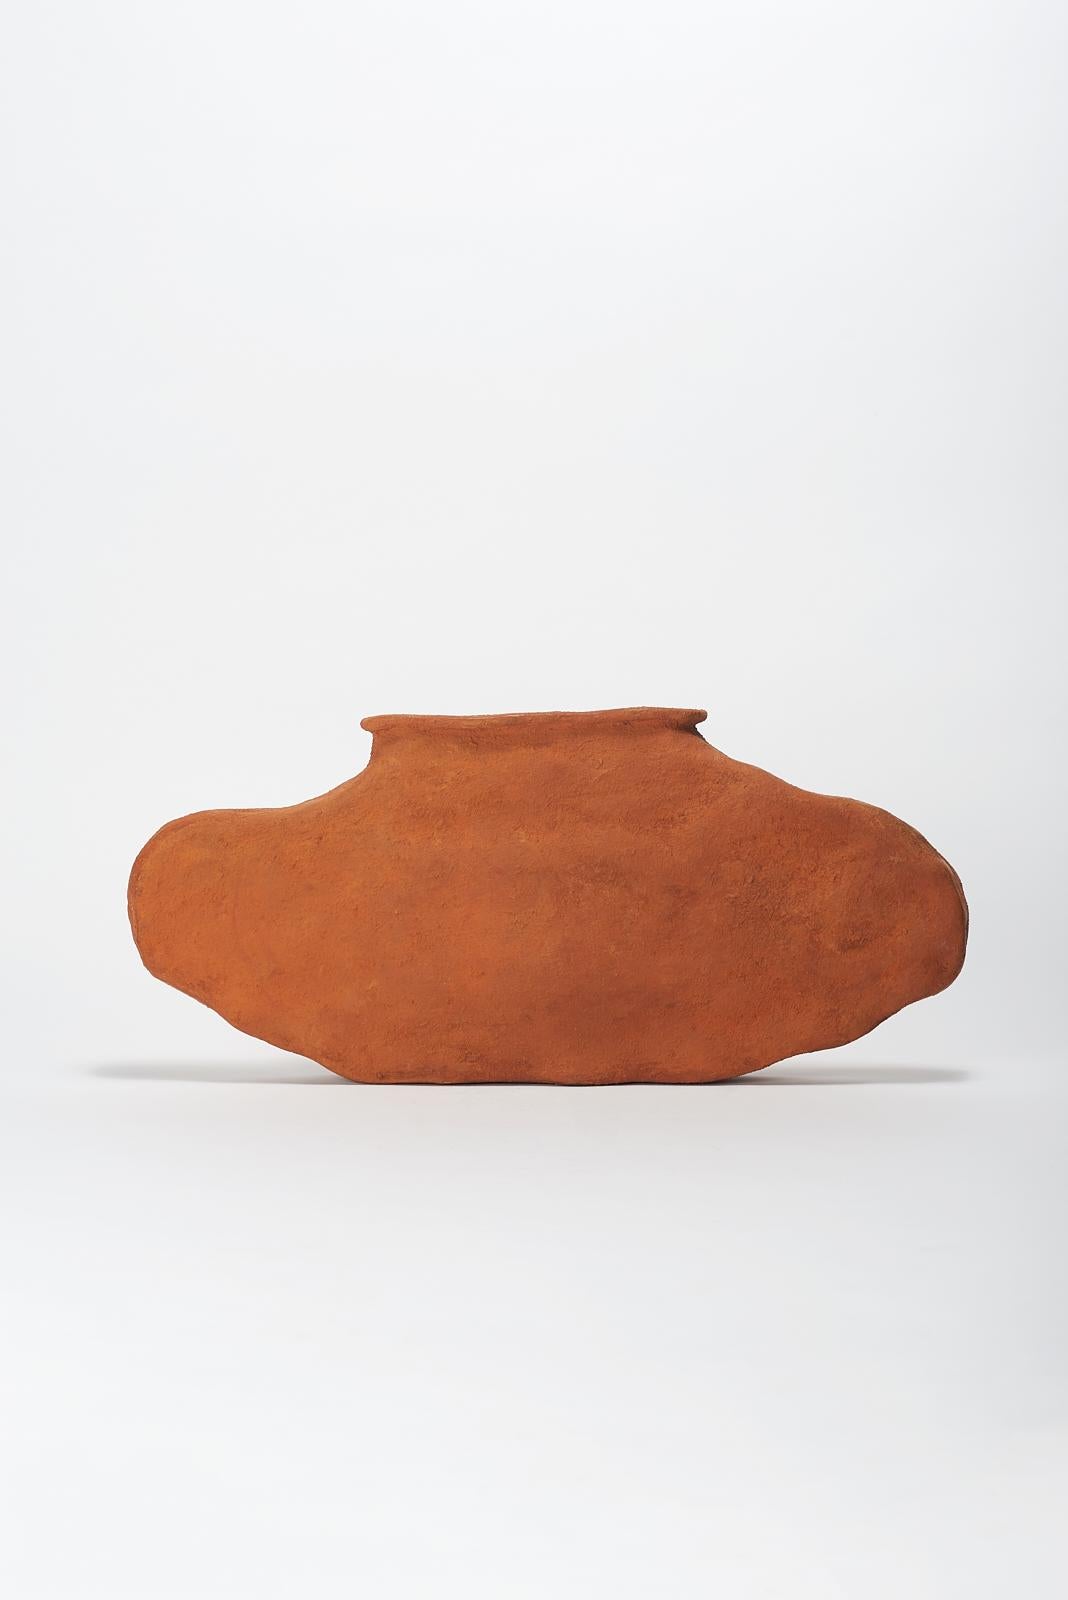 Lata Vase by Willem Van Hooff
Core Vessel Series
Dimensions: W 58 x H 26 cm
Materials: Earthenware, ceramic, pigments, glaze

Core is a series of flat vessels inspired by Prehistoric African building techniques. Willem has been fascinated by